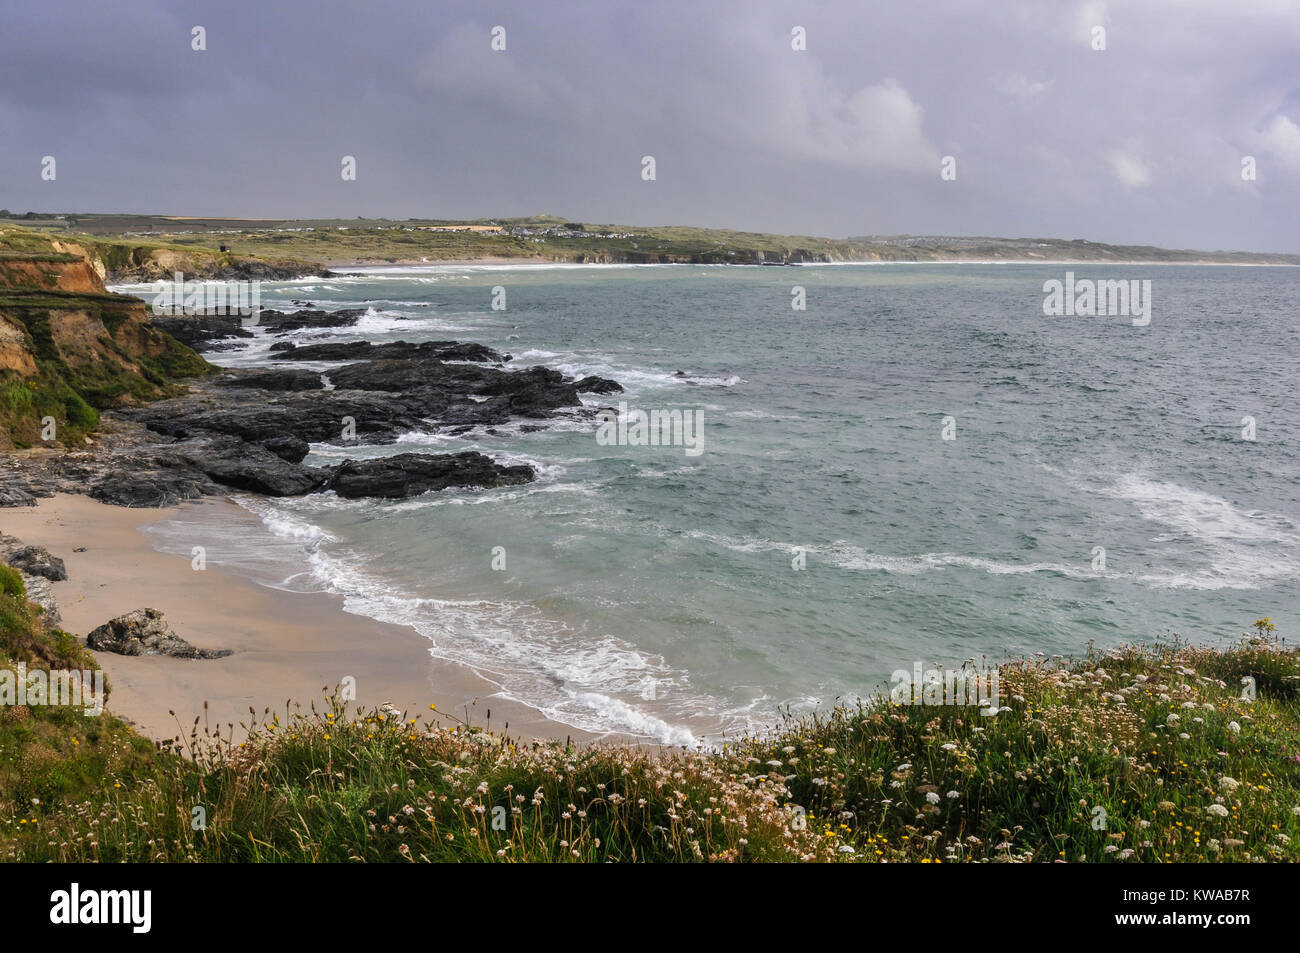 View out to sea from the grassy clifftop across a bay to the rocky beach on the Cornish coast, Cornwall, England, UK Stock Photo